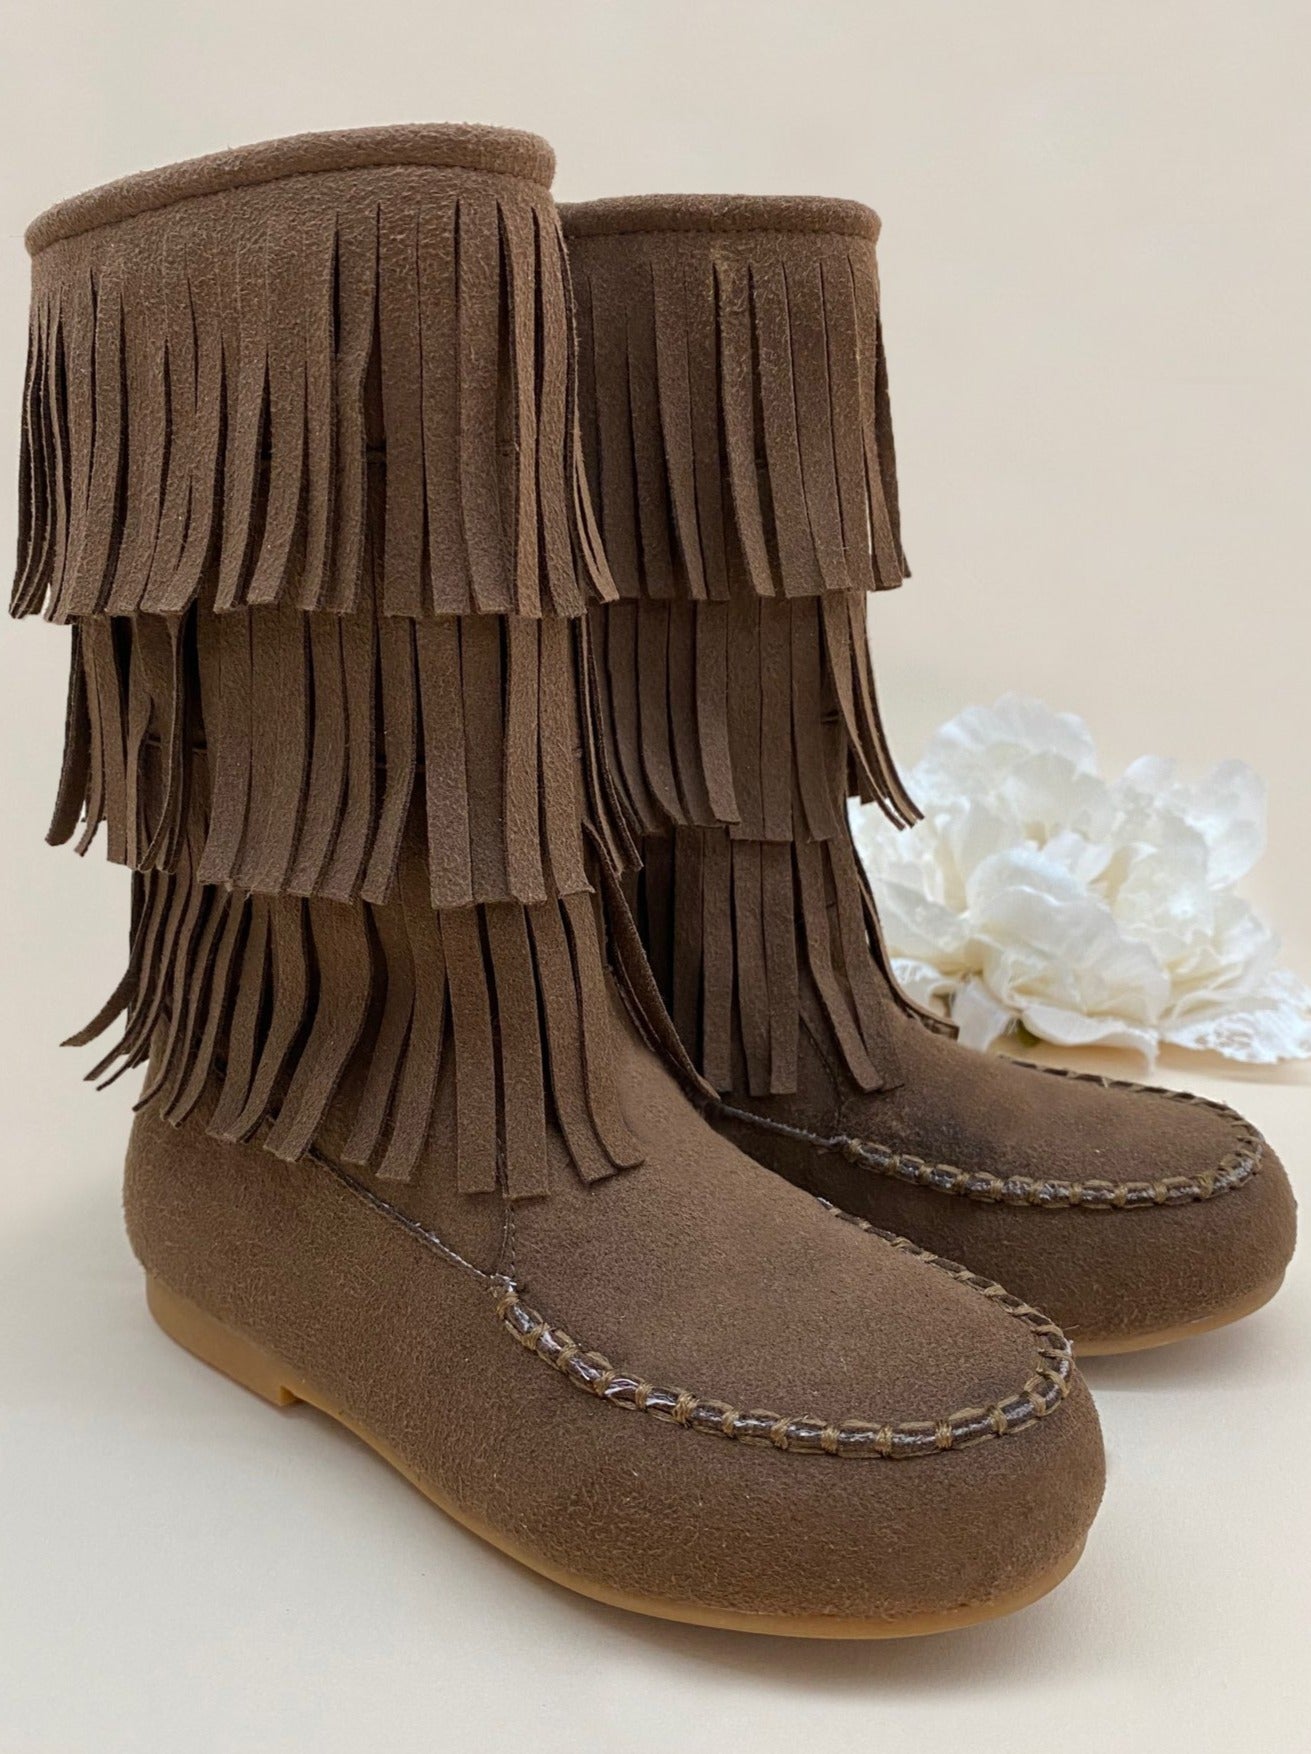 Mia Belle Girls Brown Fringe Boots by Liv & Mia